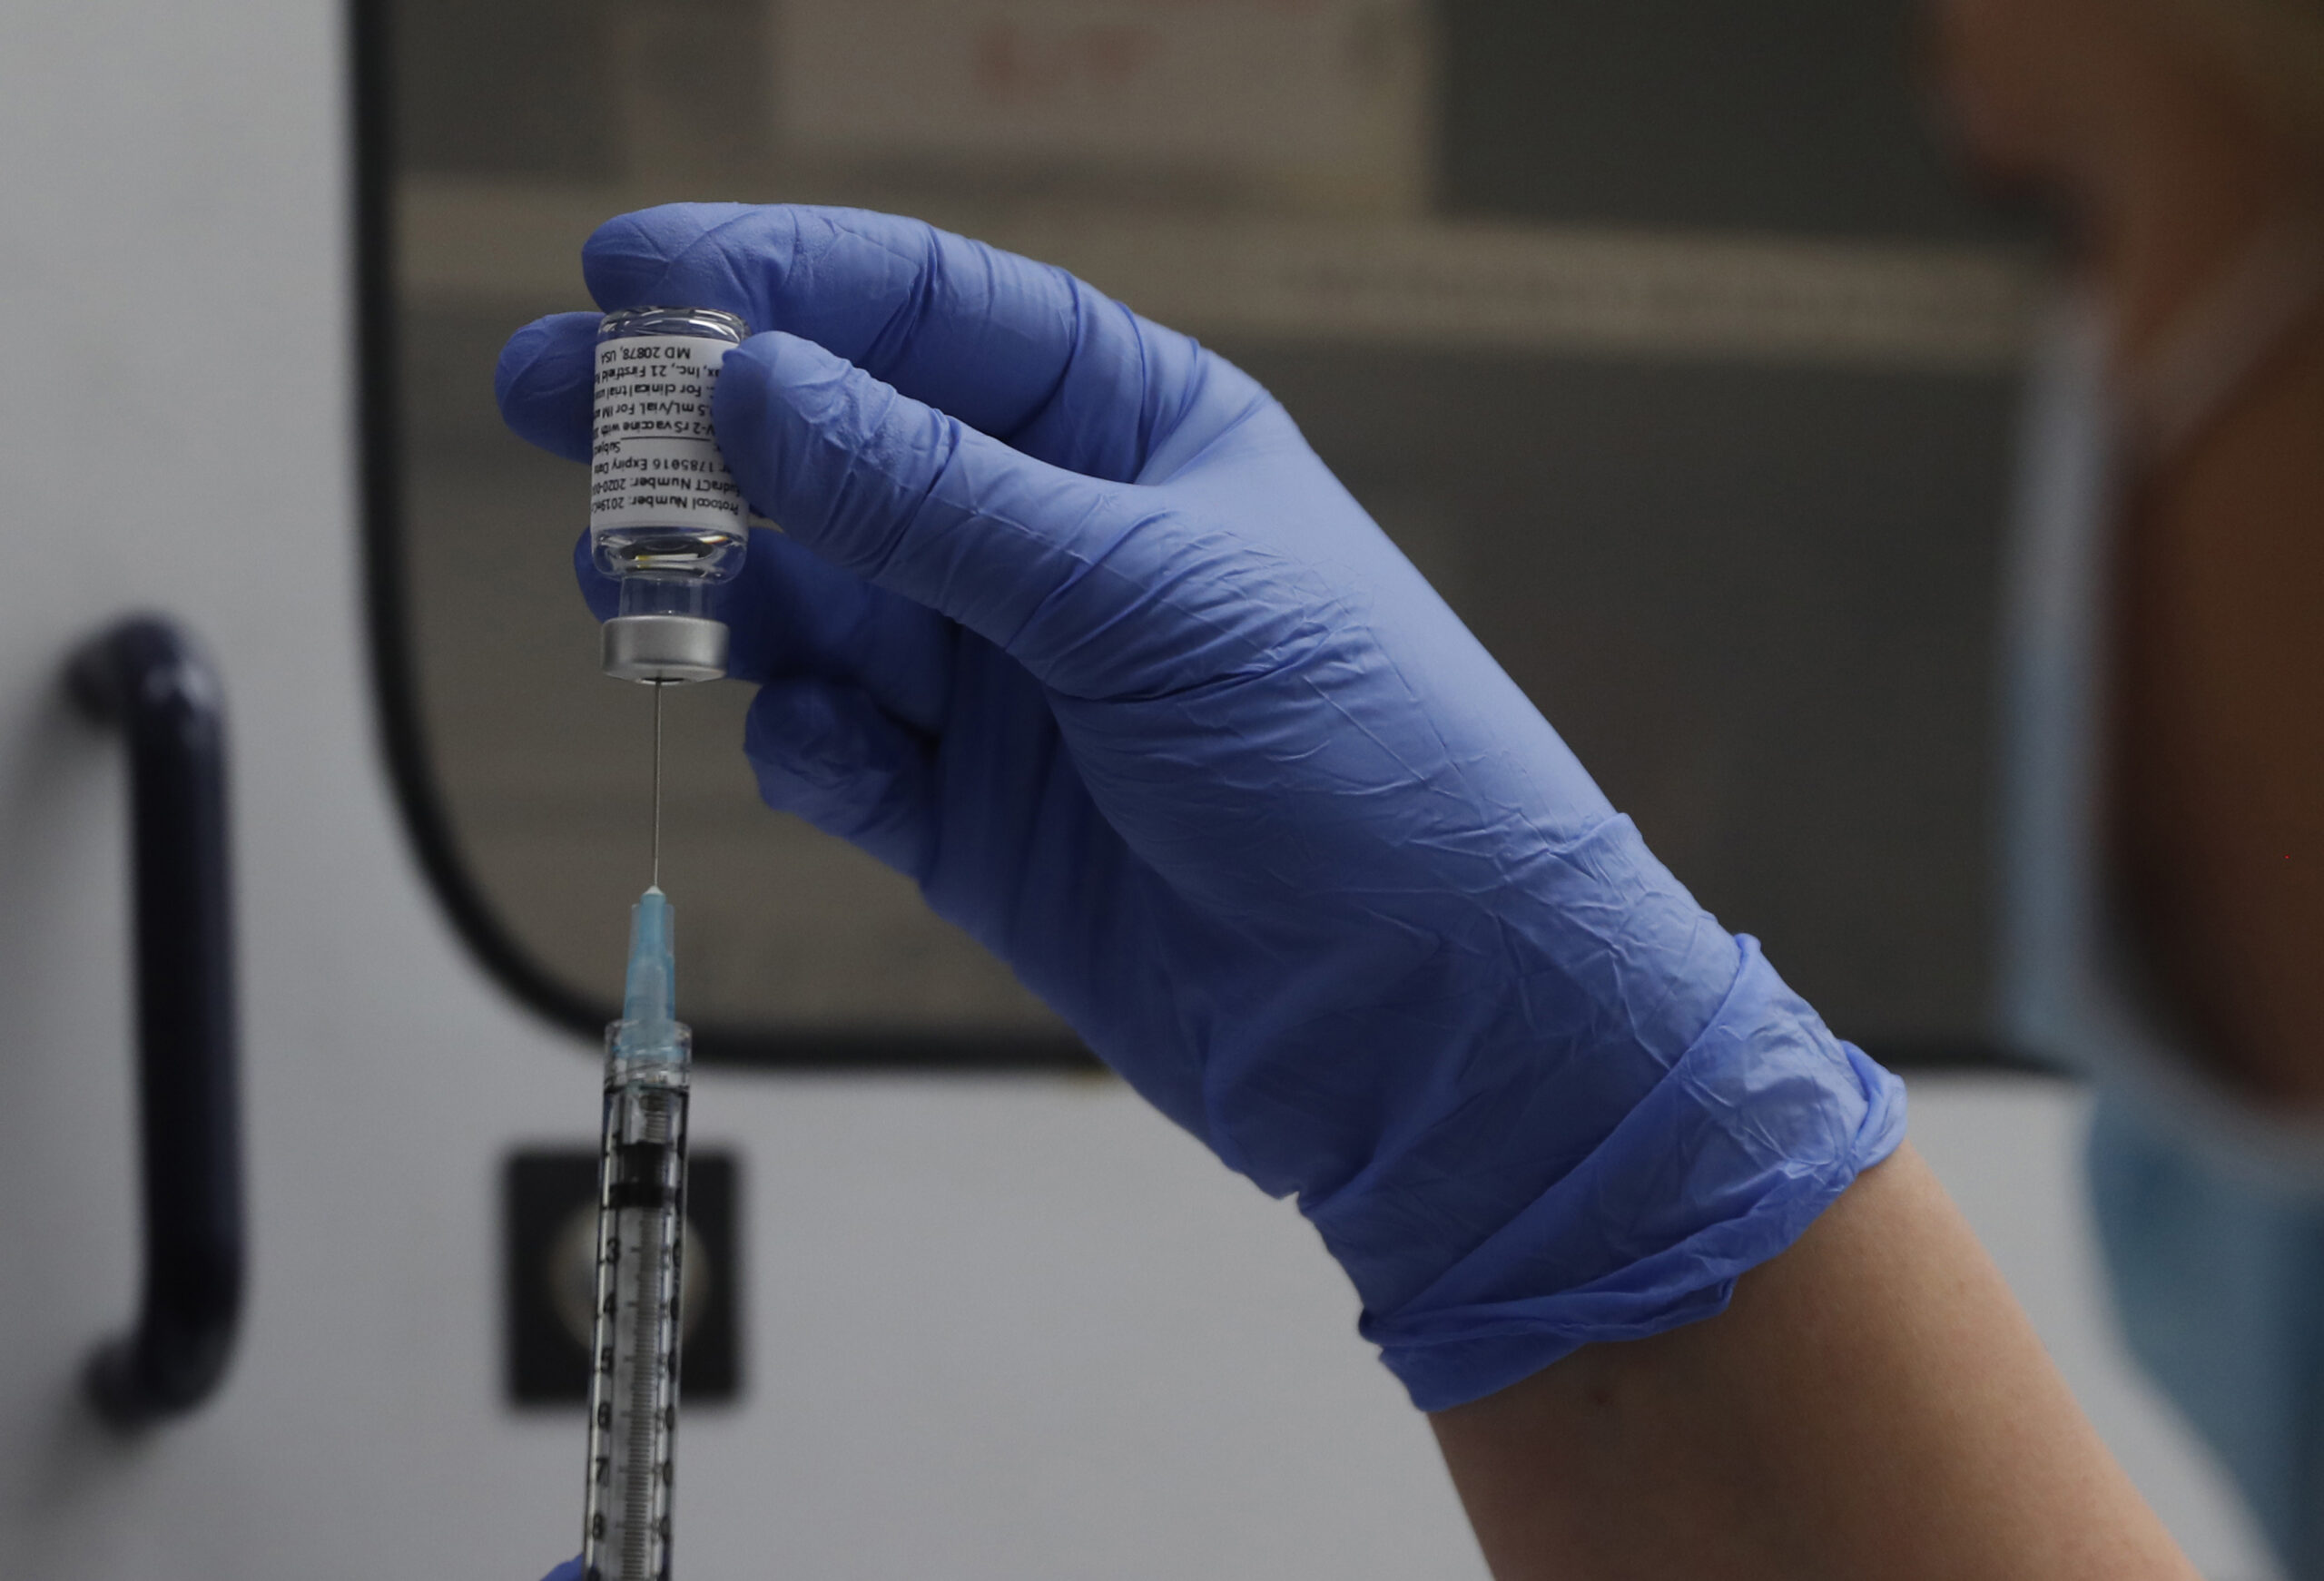 FILE - A vial of the Phase 3 Novavax coronavirus vaccine is seen ready for use in the trial at St. George's University hospital in London, Oct. 7, 2020. The Novavax COVID-19 vaccine that could soon win federal approval may offer a boost for the U.S. military: an opportunity to get shots into some of the thousands of service members who have refused the vaccine for religious reasons. (AP Photo/Alastair Grant, File)